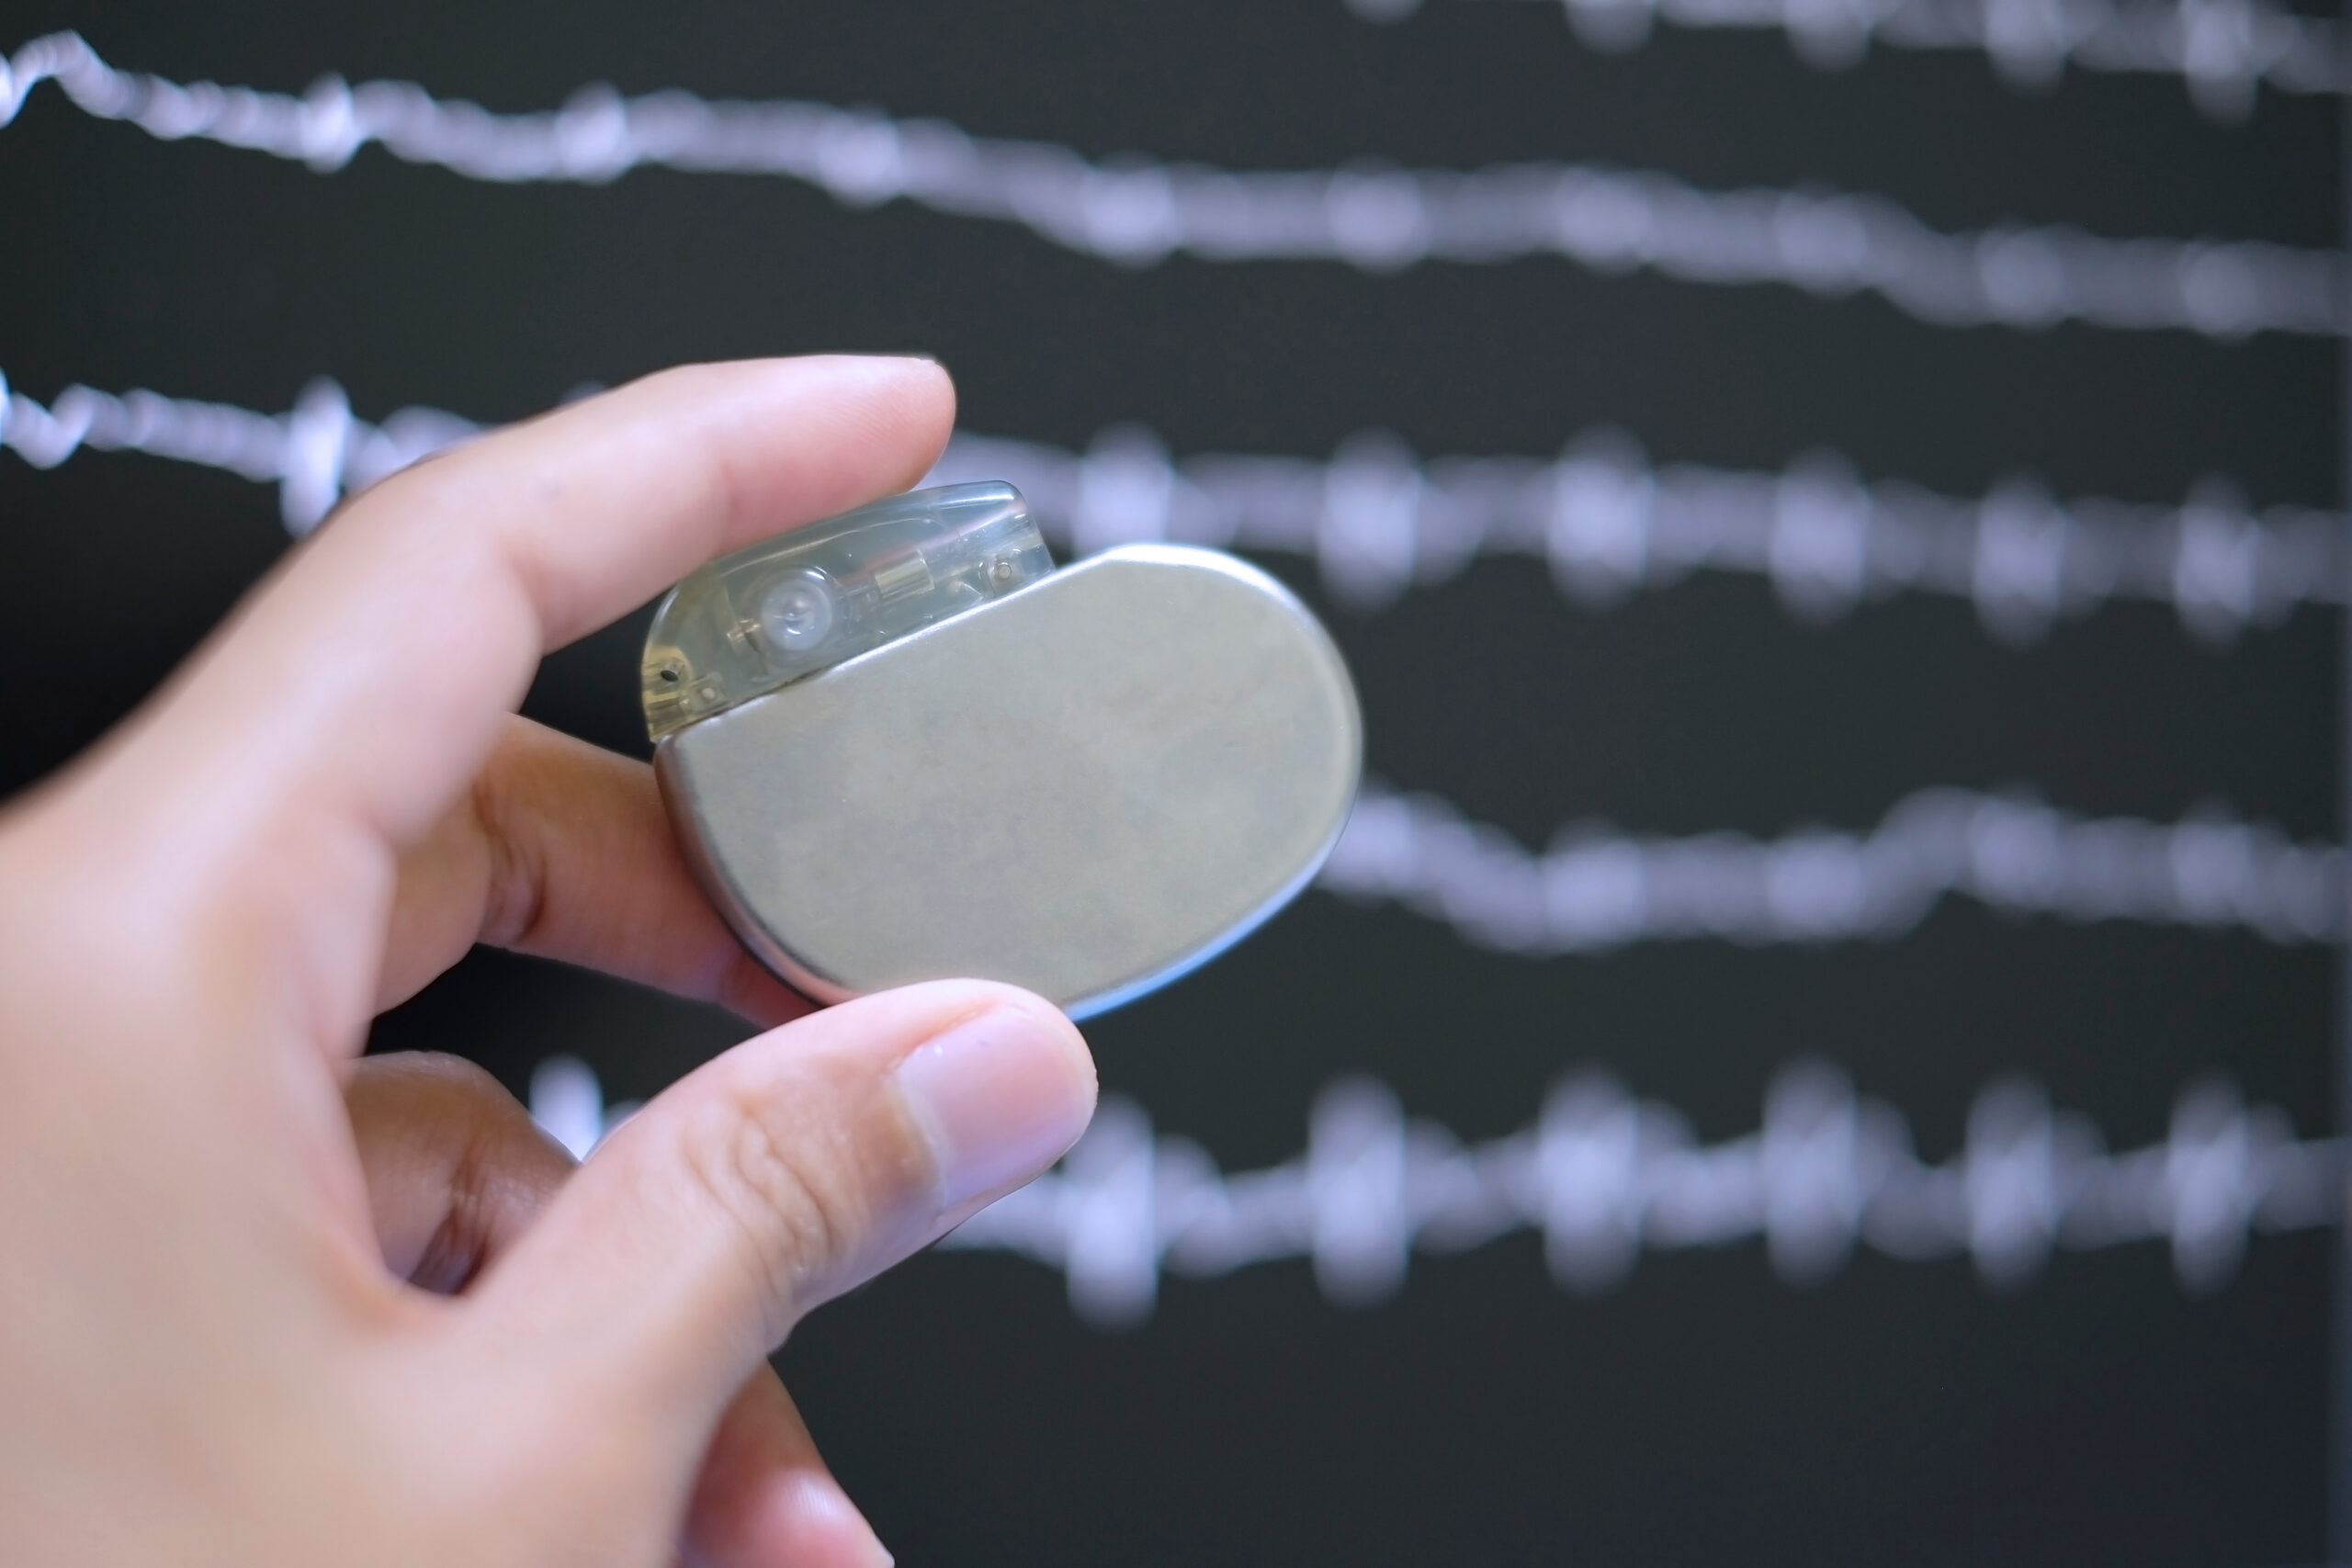 Pacemakers help the heart to beat more regularly